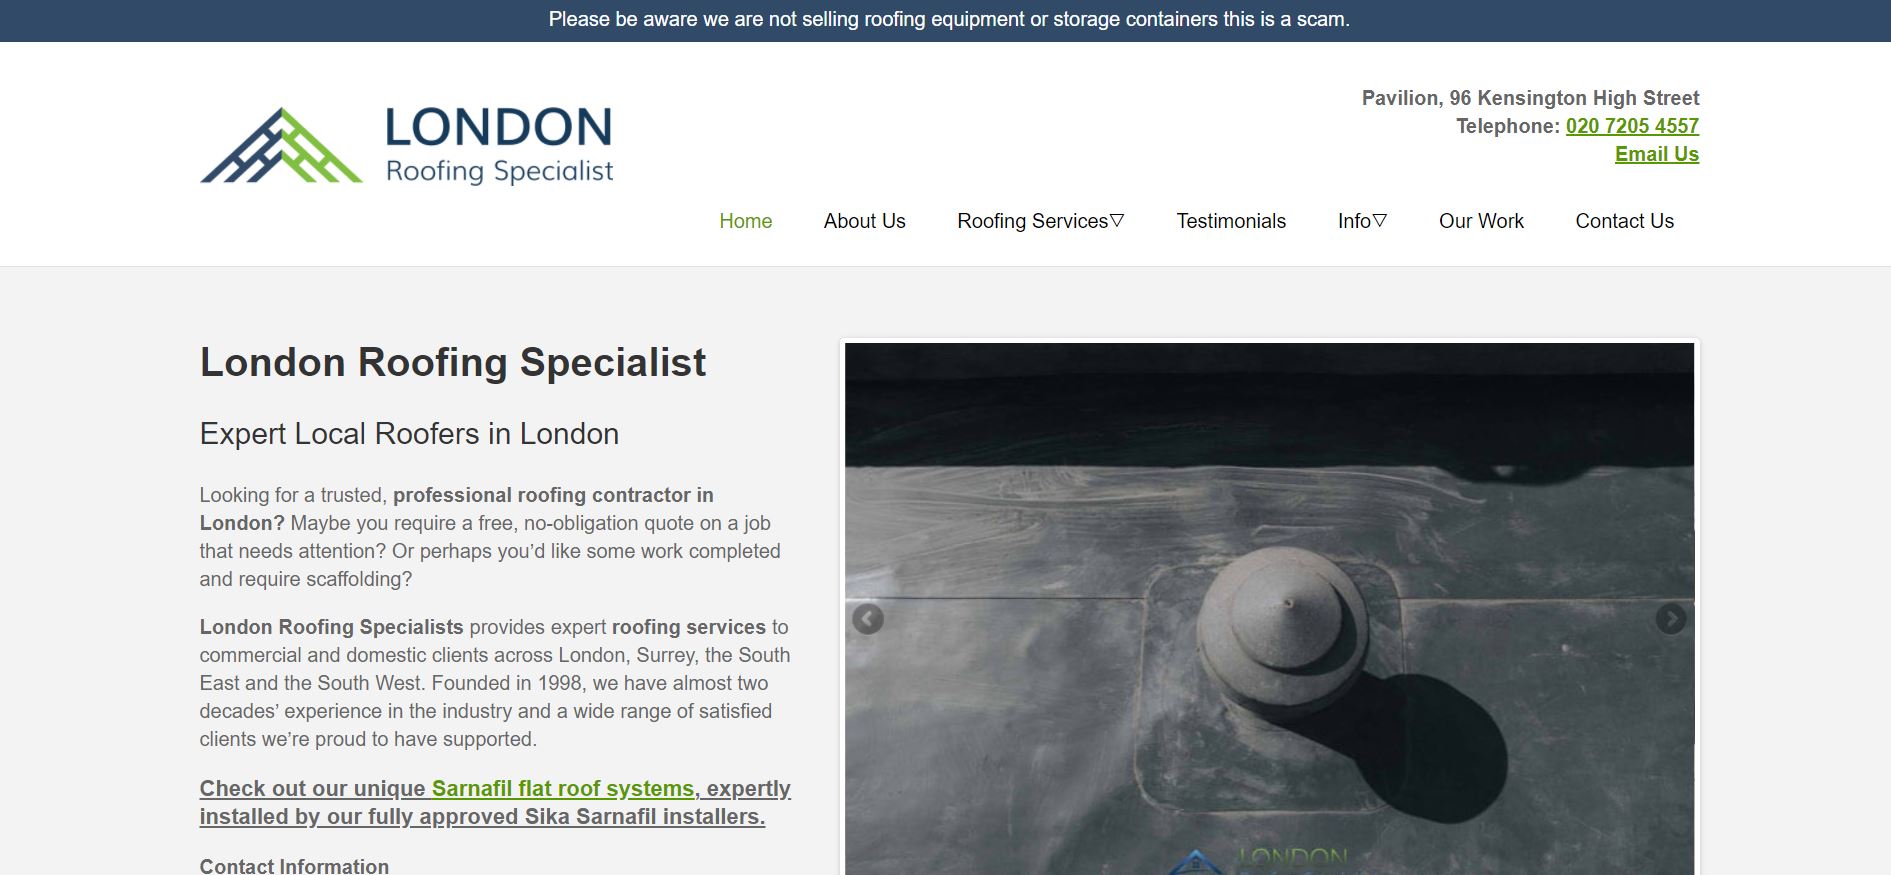 London Roofing Specialist